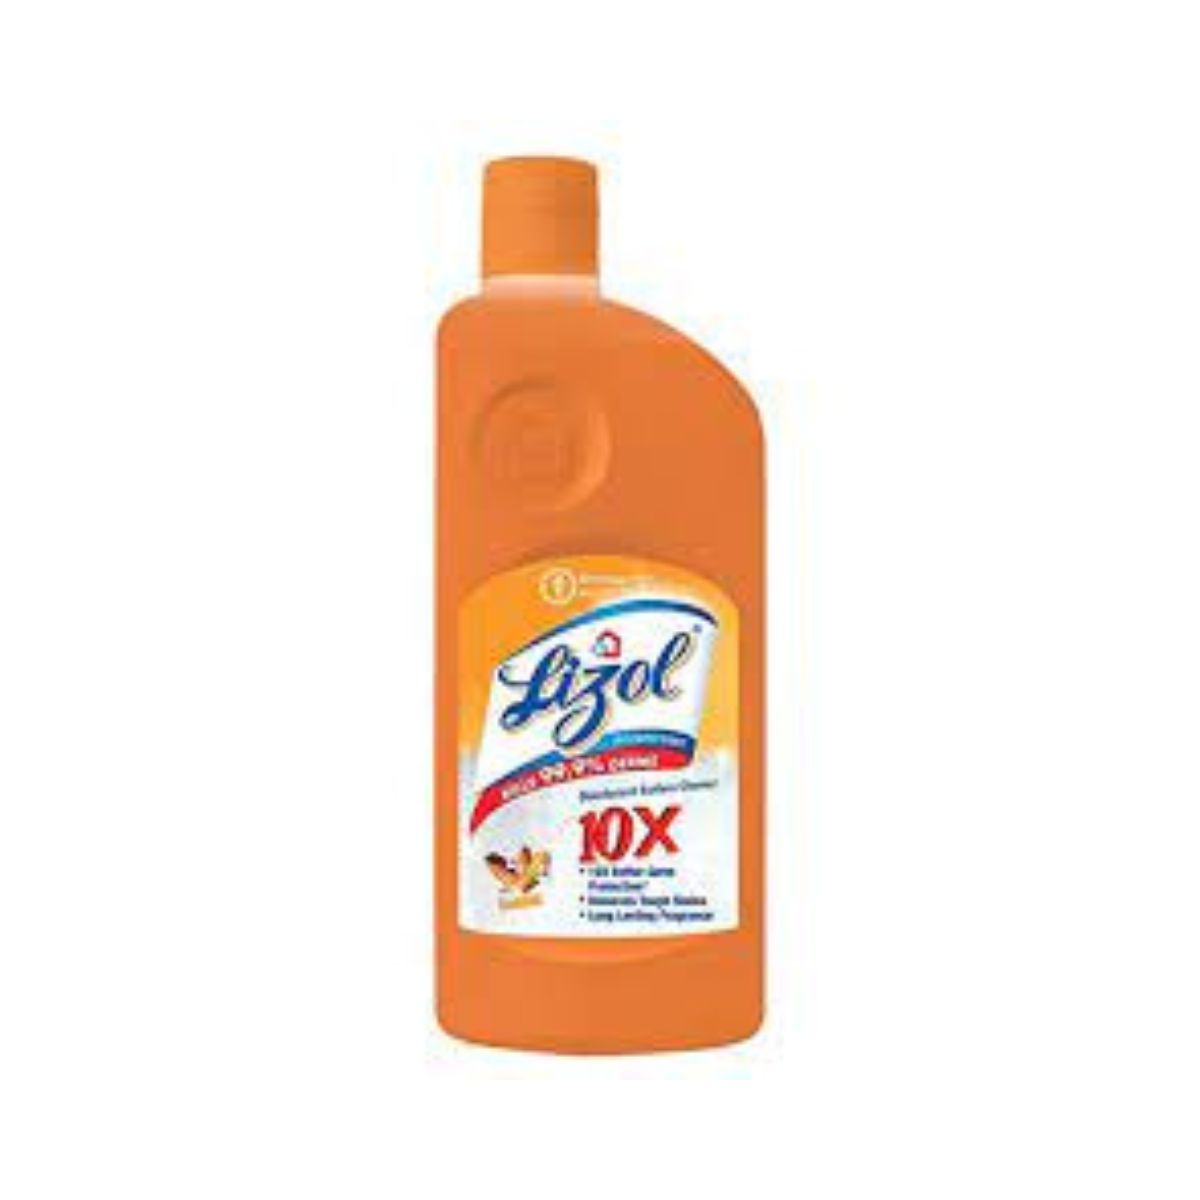 Lizol All In 1 Disinfectant Surface Cleaner - Sandal - 500ml